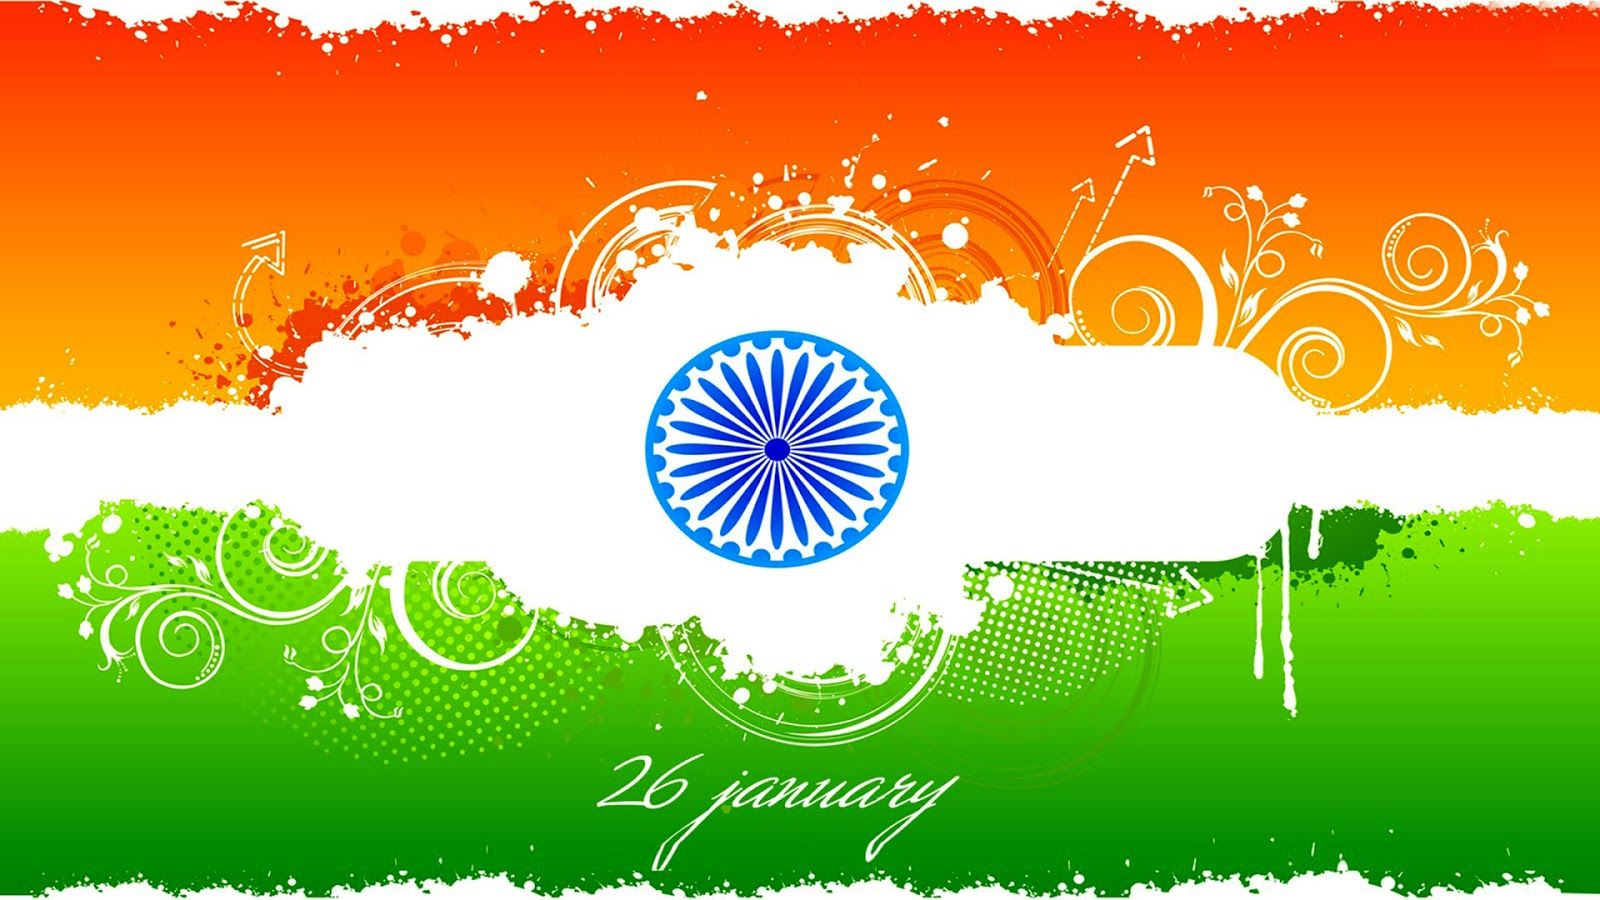 Best Republic Day HD Images and Wallpapers for You {Free Download} - Techicy